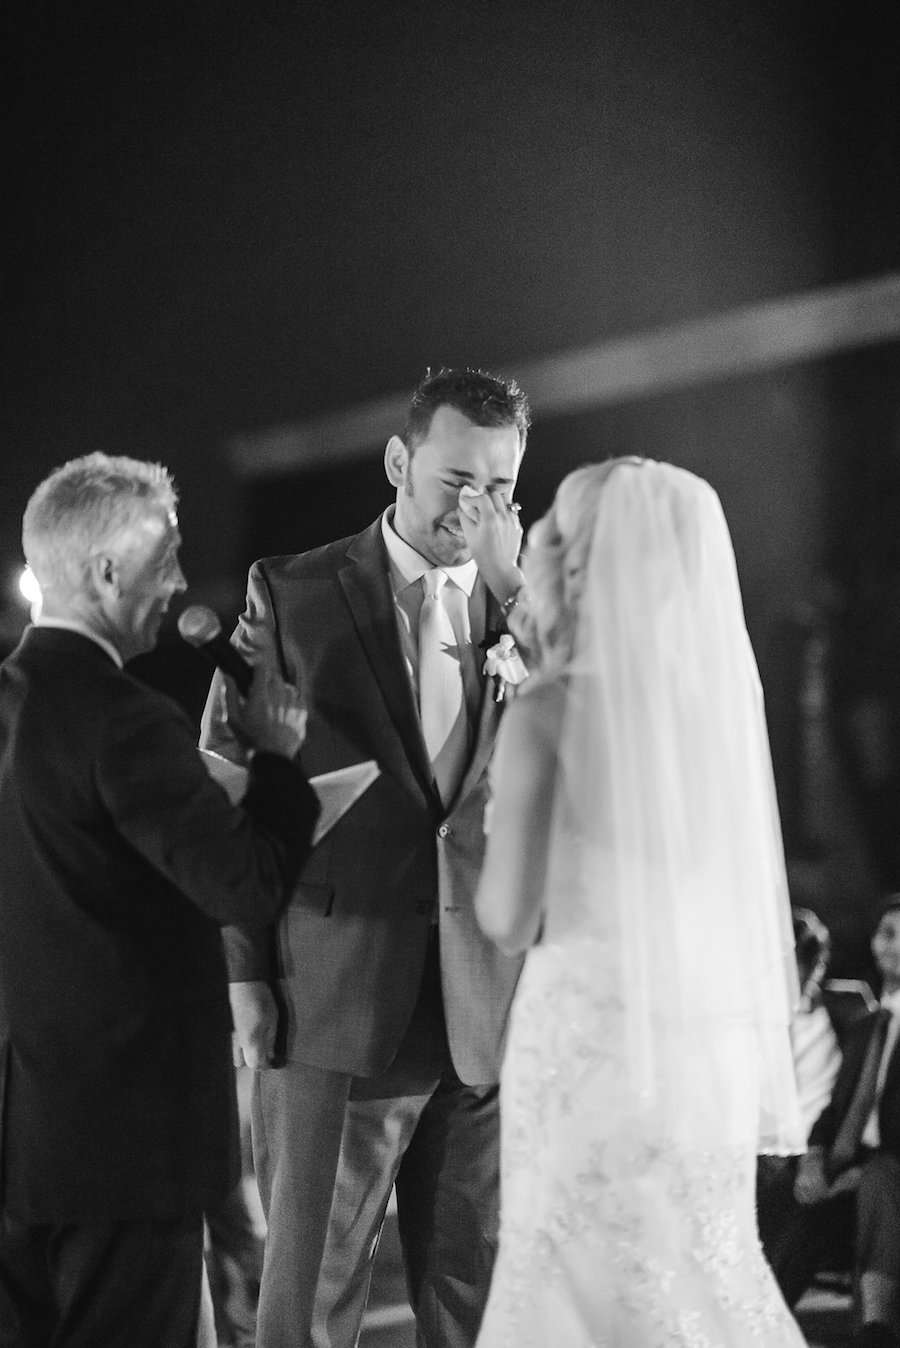 Tampa Wedding Day Ceremony Portrait | Emotional Groom Tearing up | Picture by Tampa Bay Wedding Photographer Marc Edwards Photographs